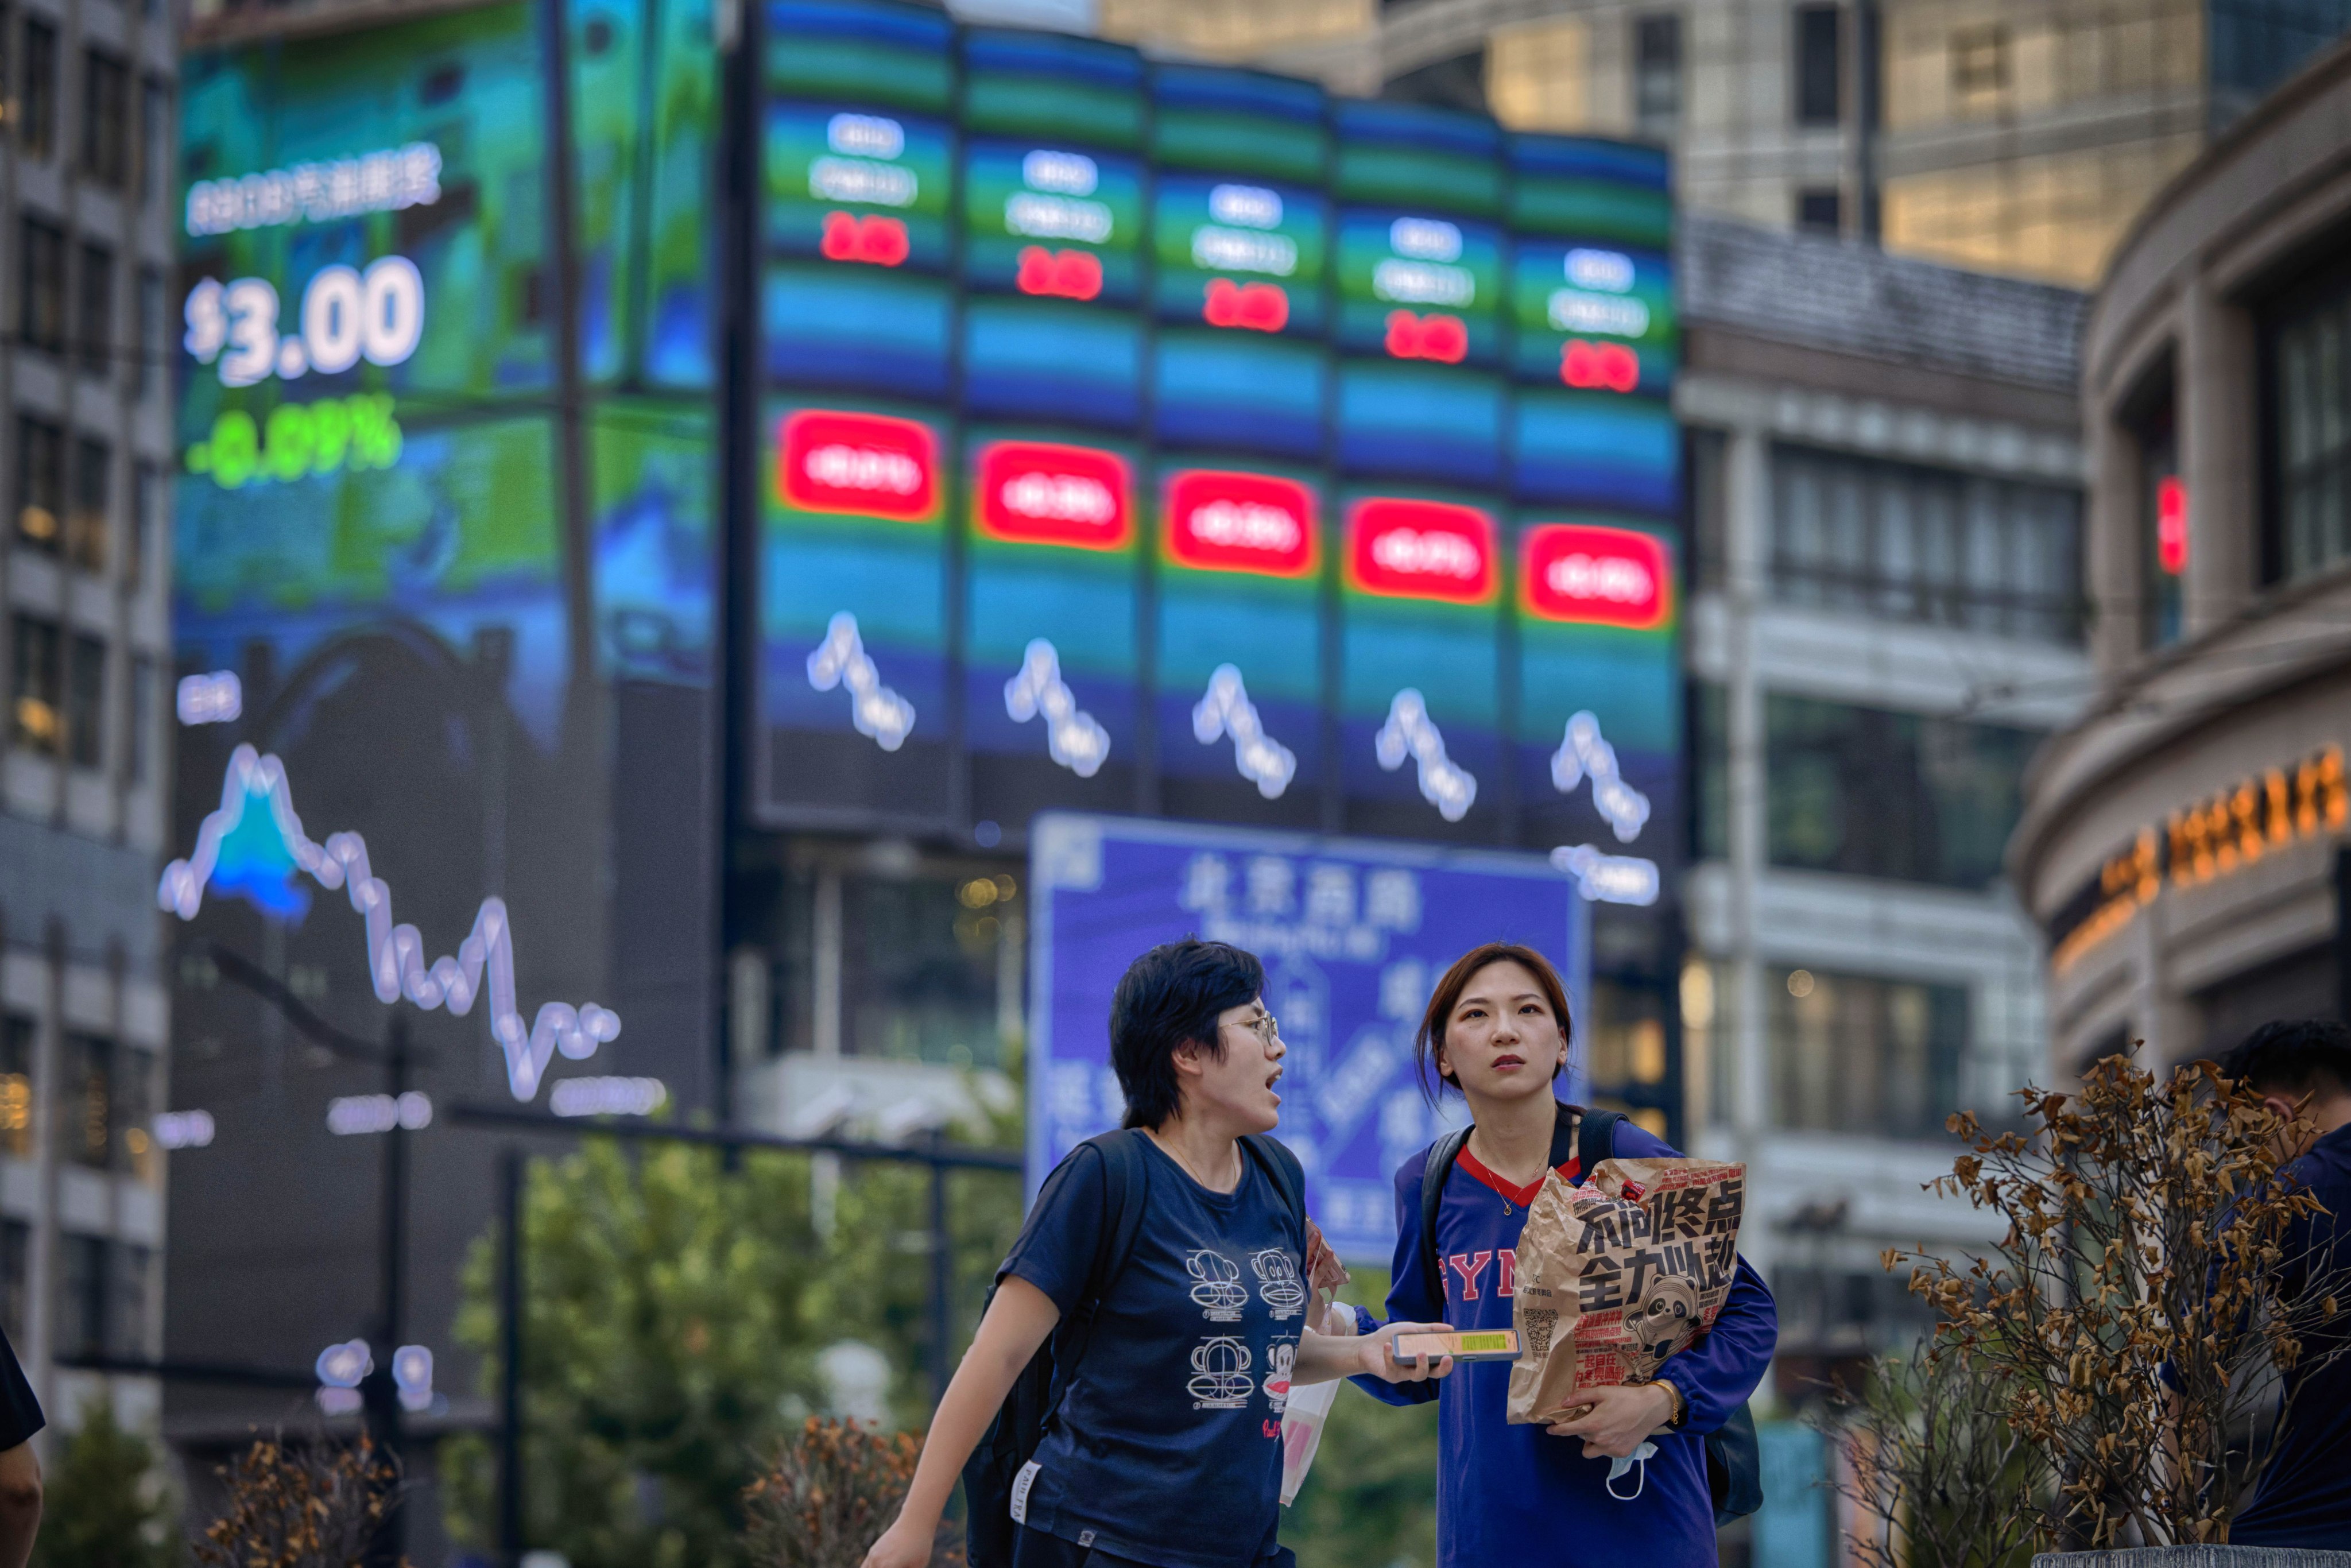 People walk in front of a large screen showing stock exchange data in Shanghai, China in 2022. Photo: EPA/EFE